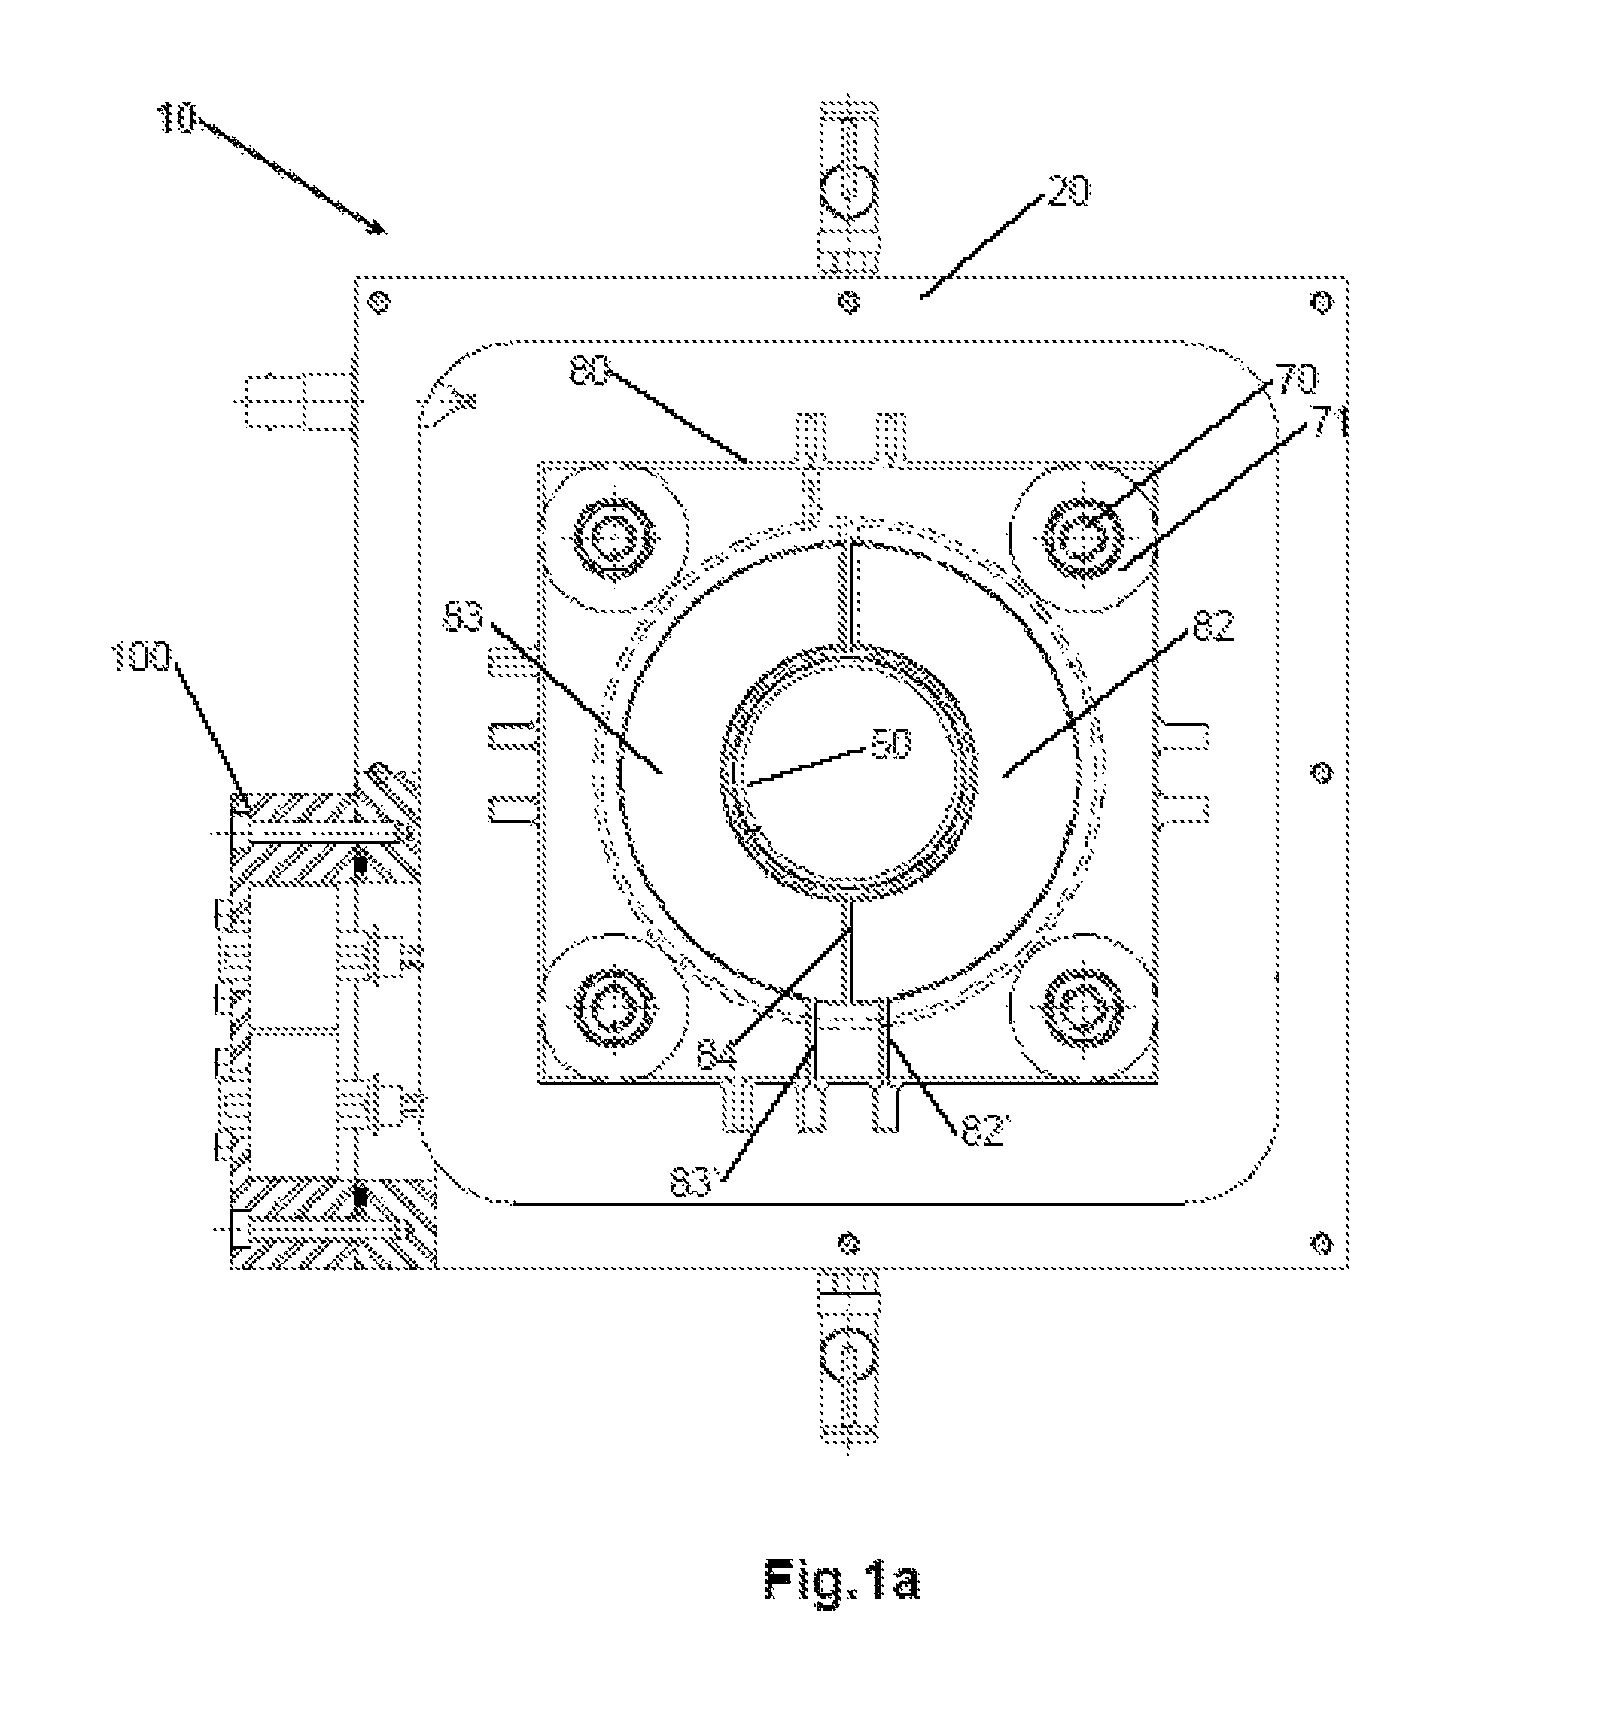 Device and method for online quality assurance in hadron therapy